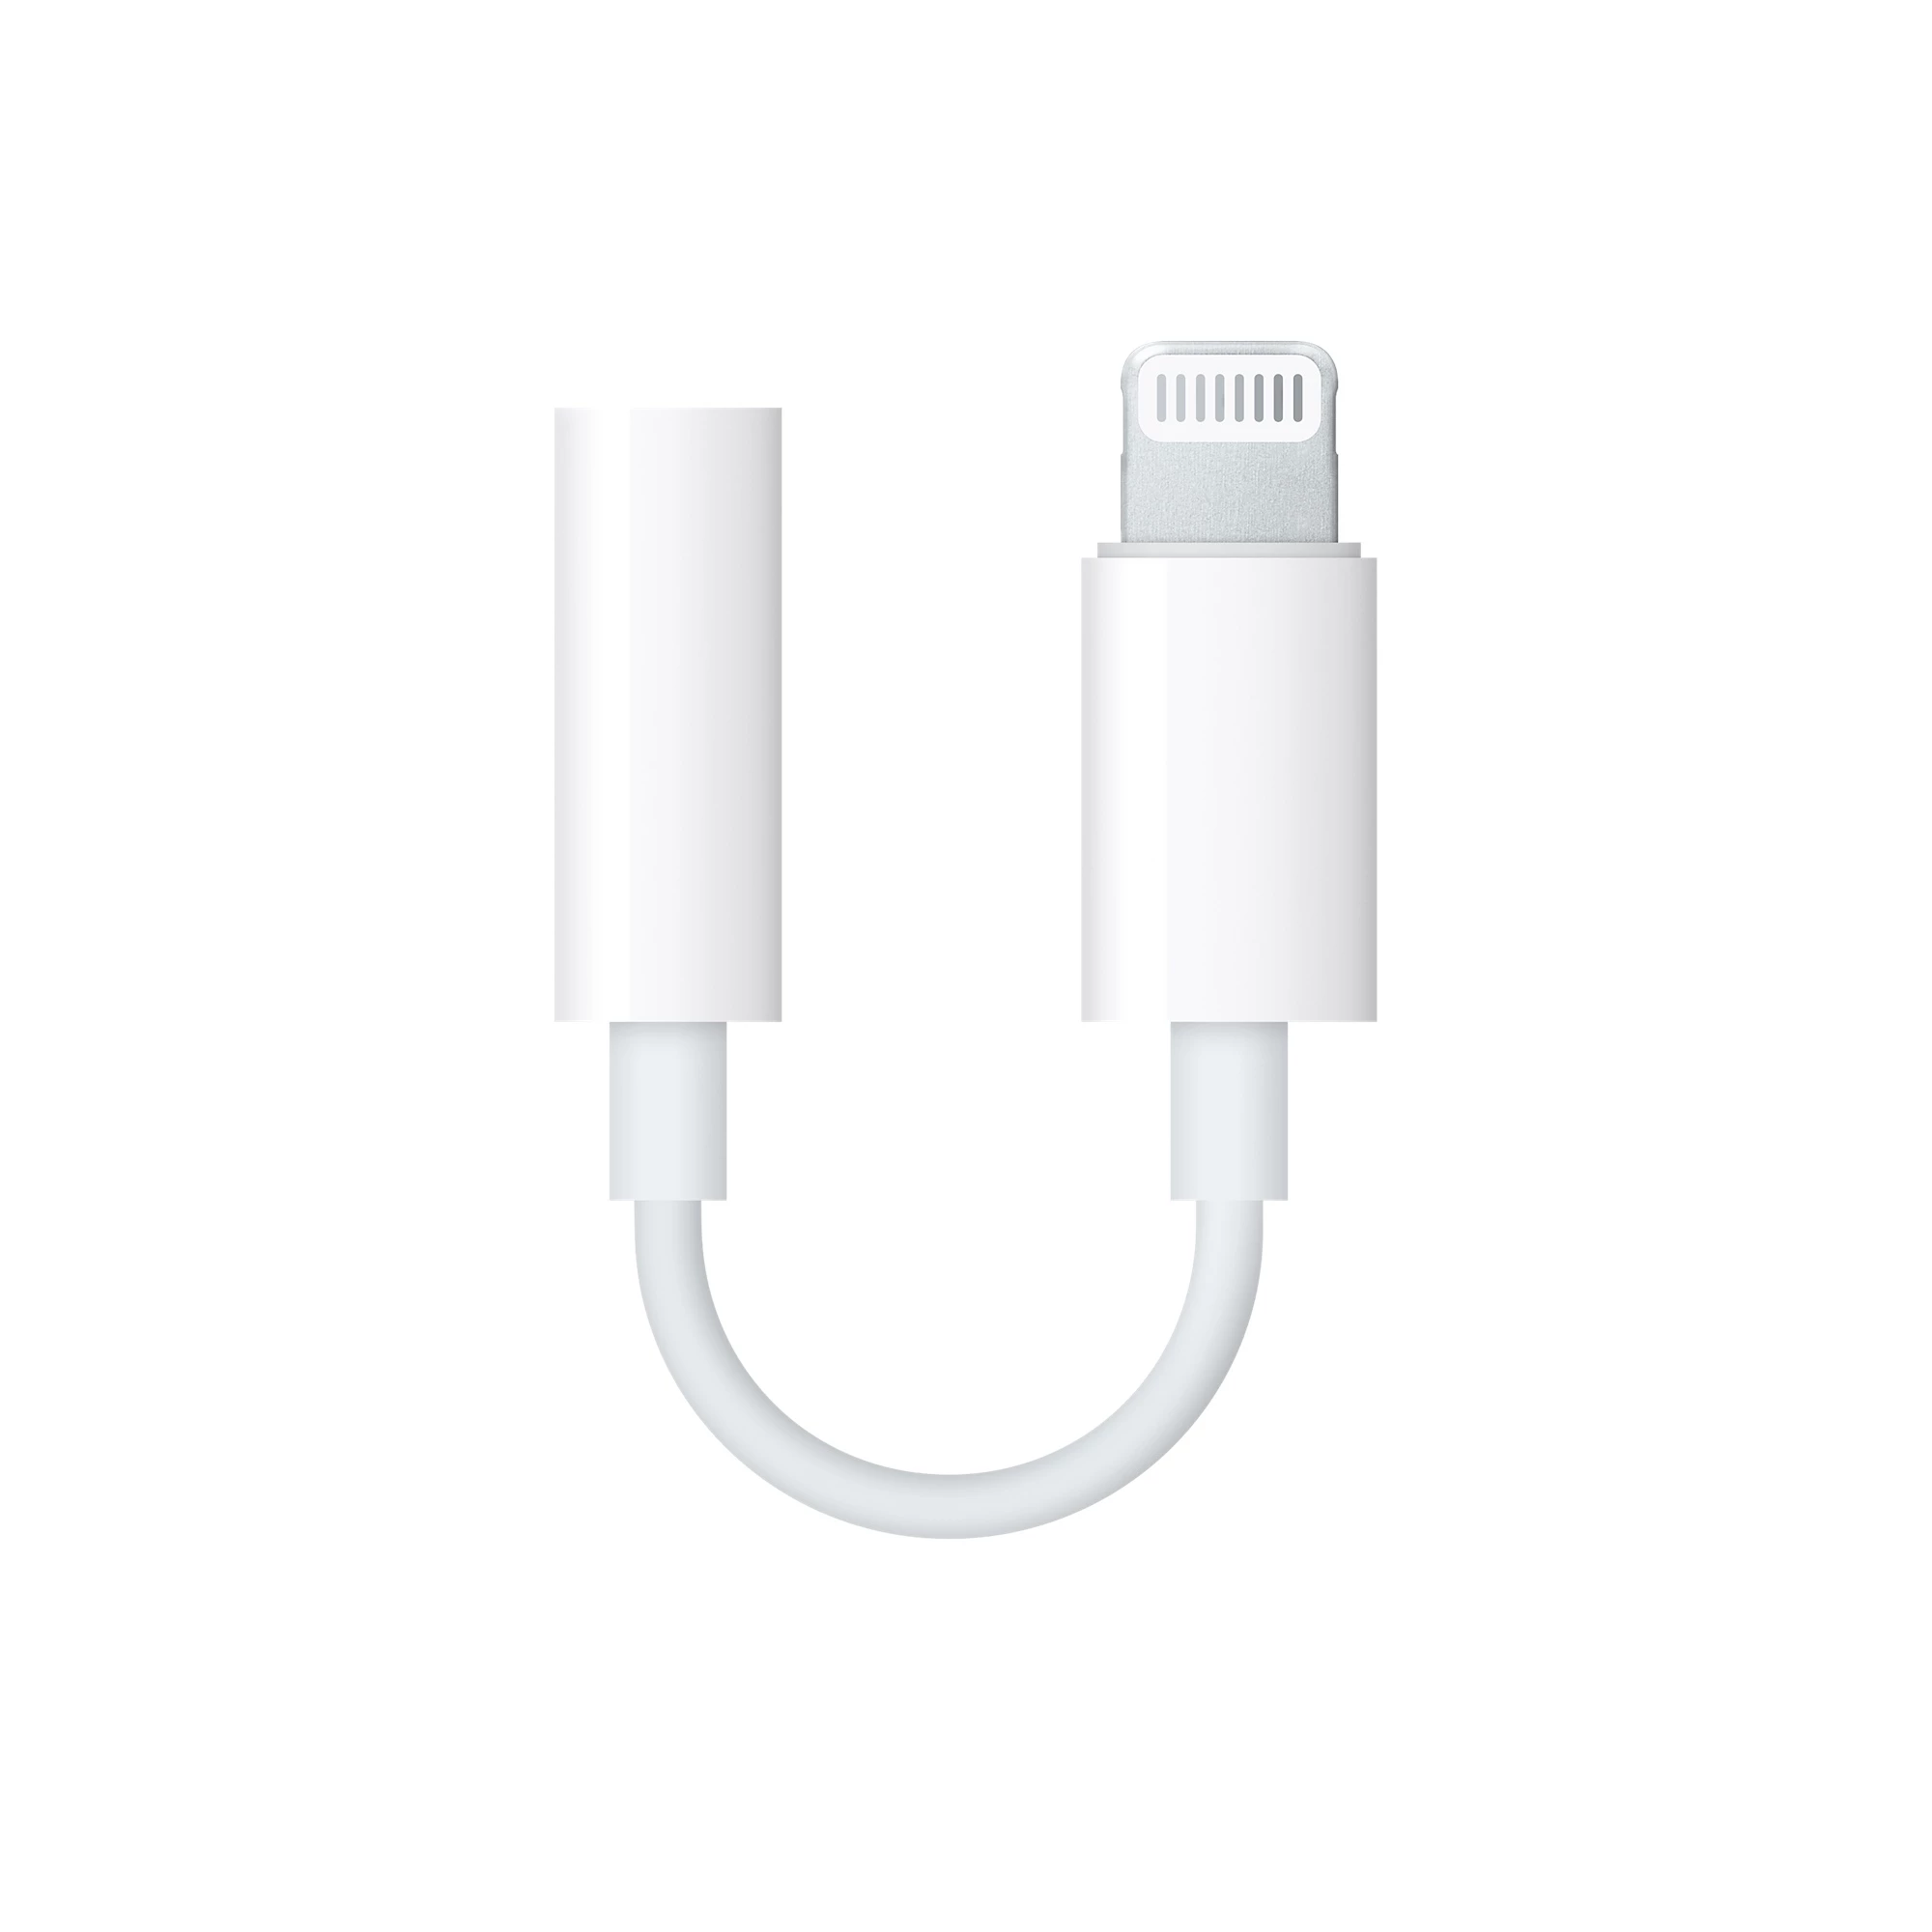 Apple Lightning to 3.5mm Headphones for iPhone (MMX62ZM/A)